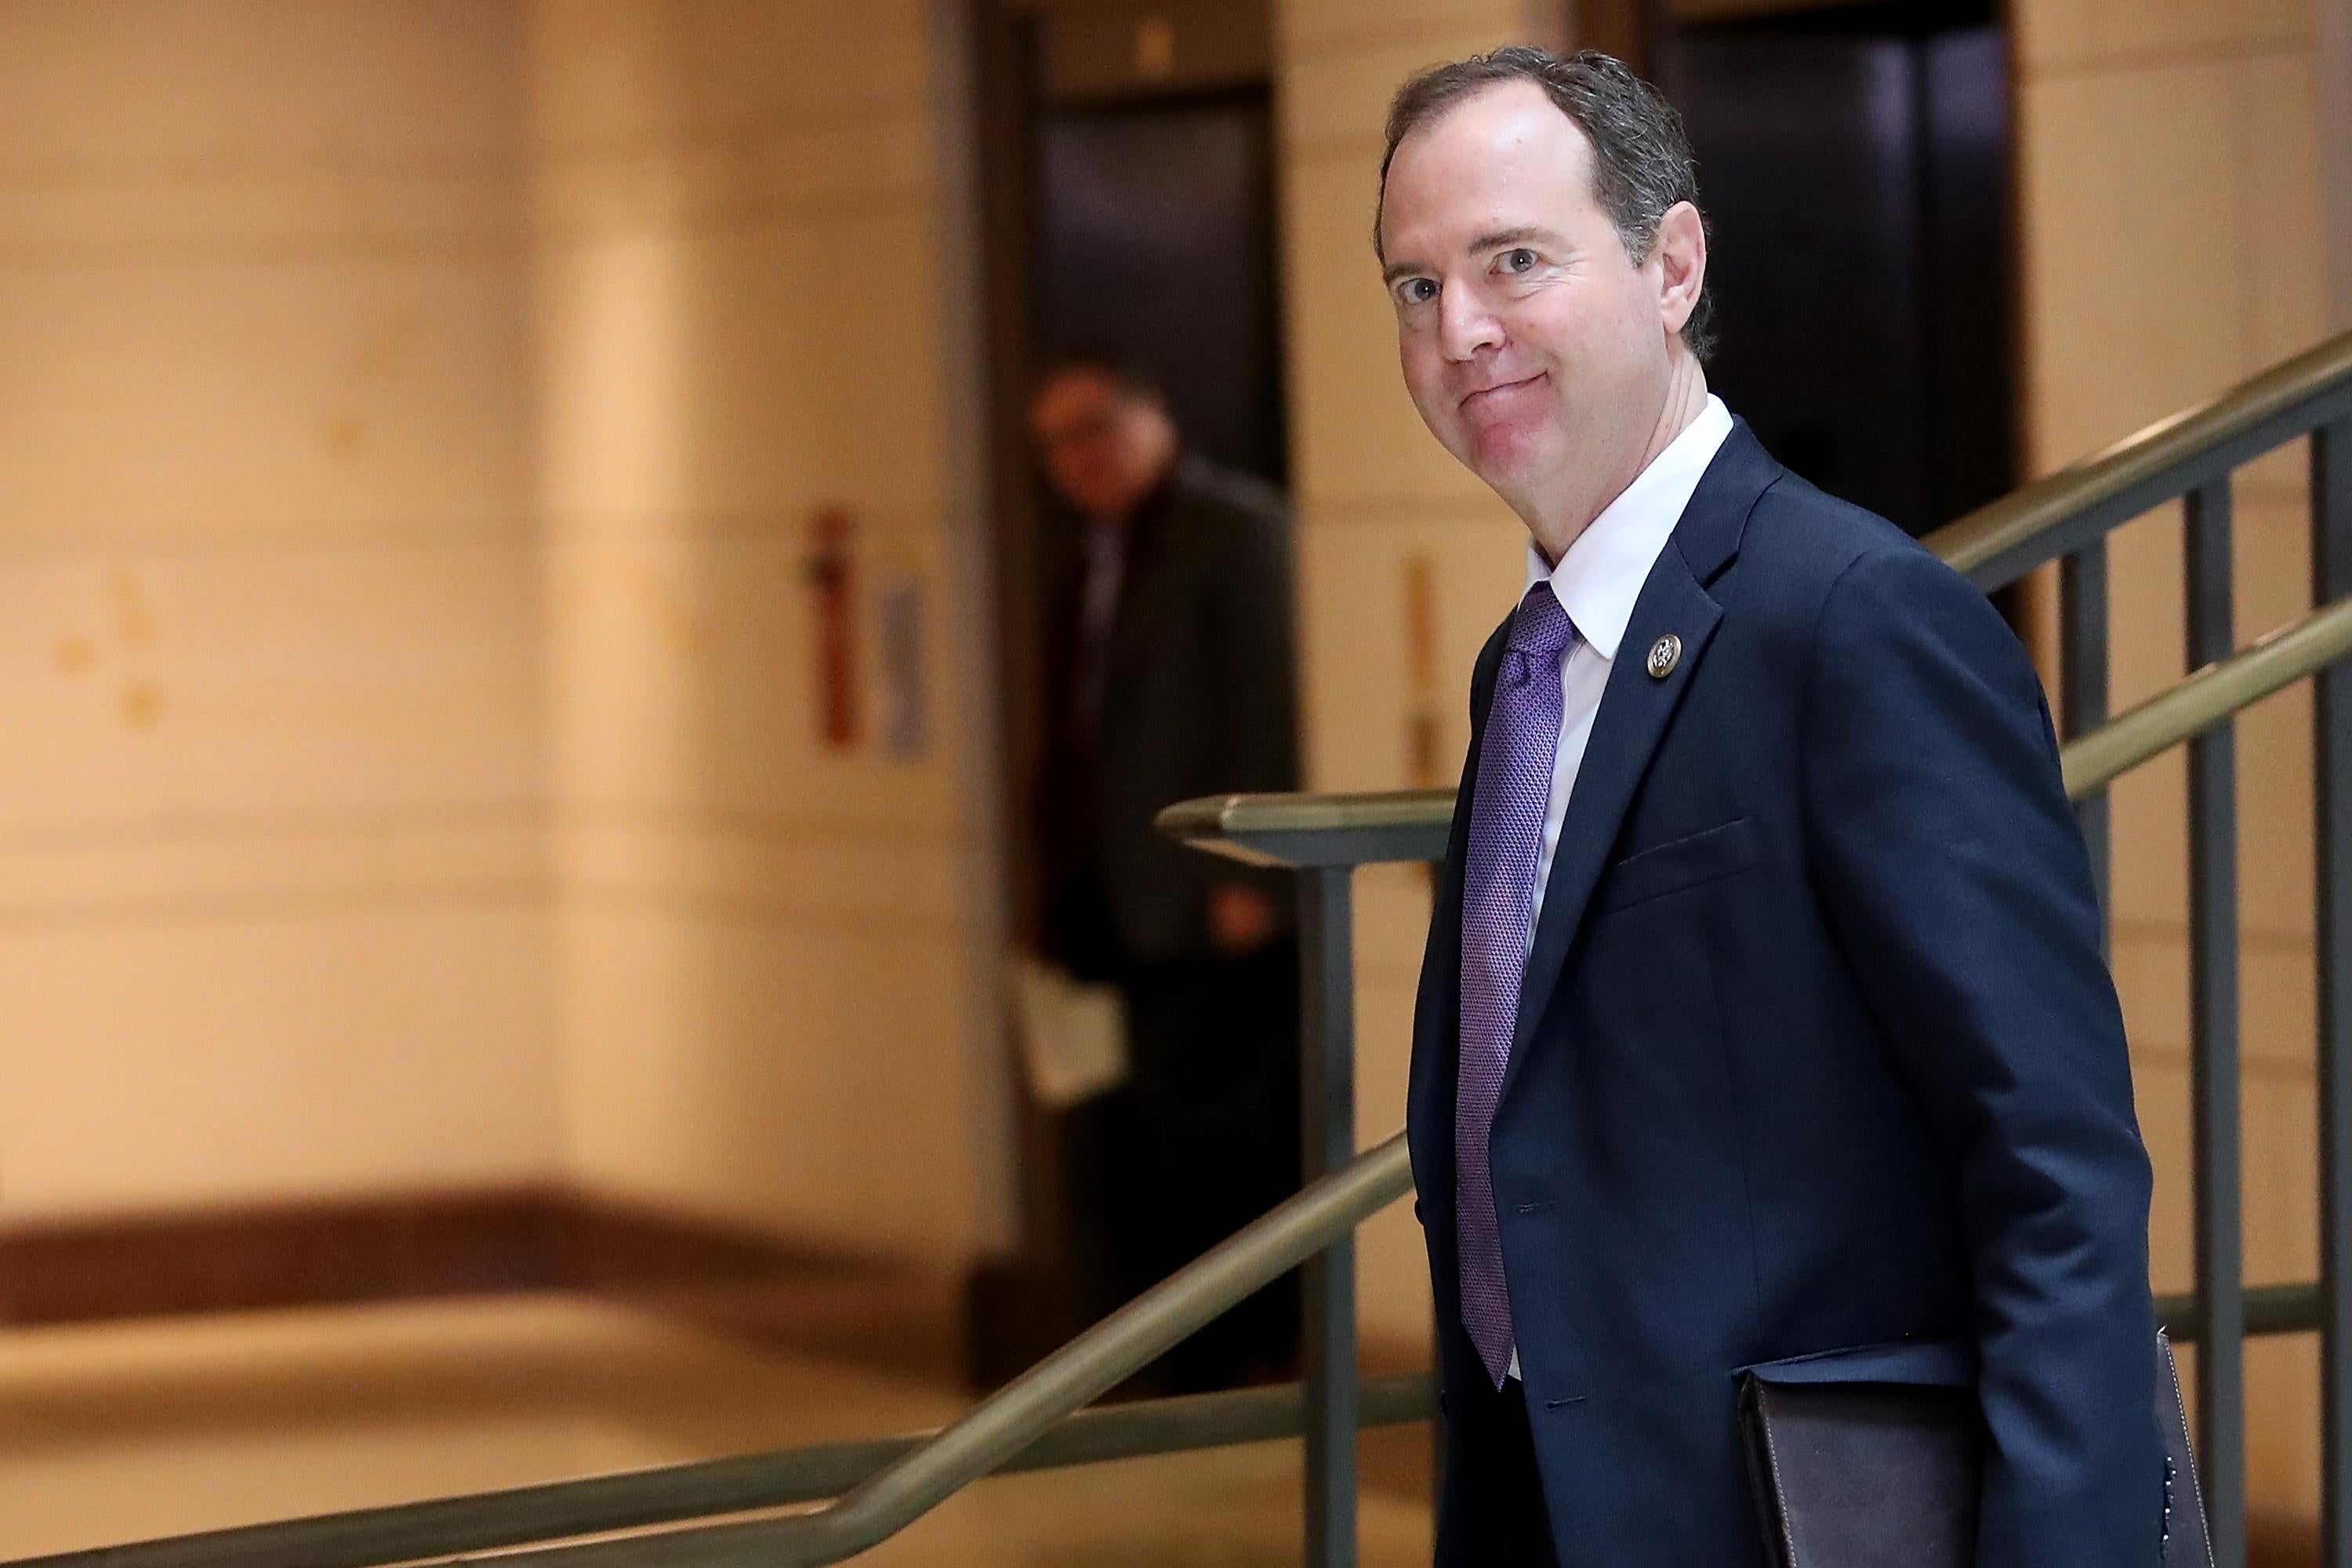 Rep. Adam Schiff (D-CA), ranking member of the House Intelligence Committee, arrives at the U.S. Capitol December 12, 2017 before a closed meeting of the committee. The committee met with Sam Clovis who worked with George Papadopoulos, a former Donald Trump campaign foreign policy advisor who struck a plea deal on charges of lying to the FBI.  